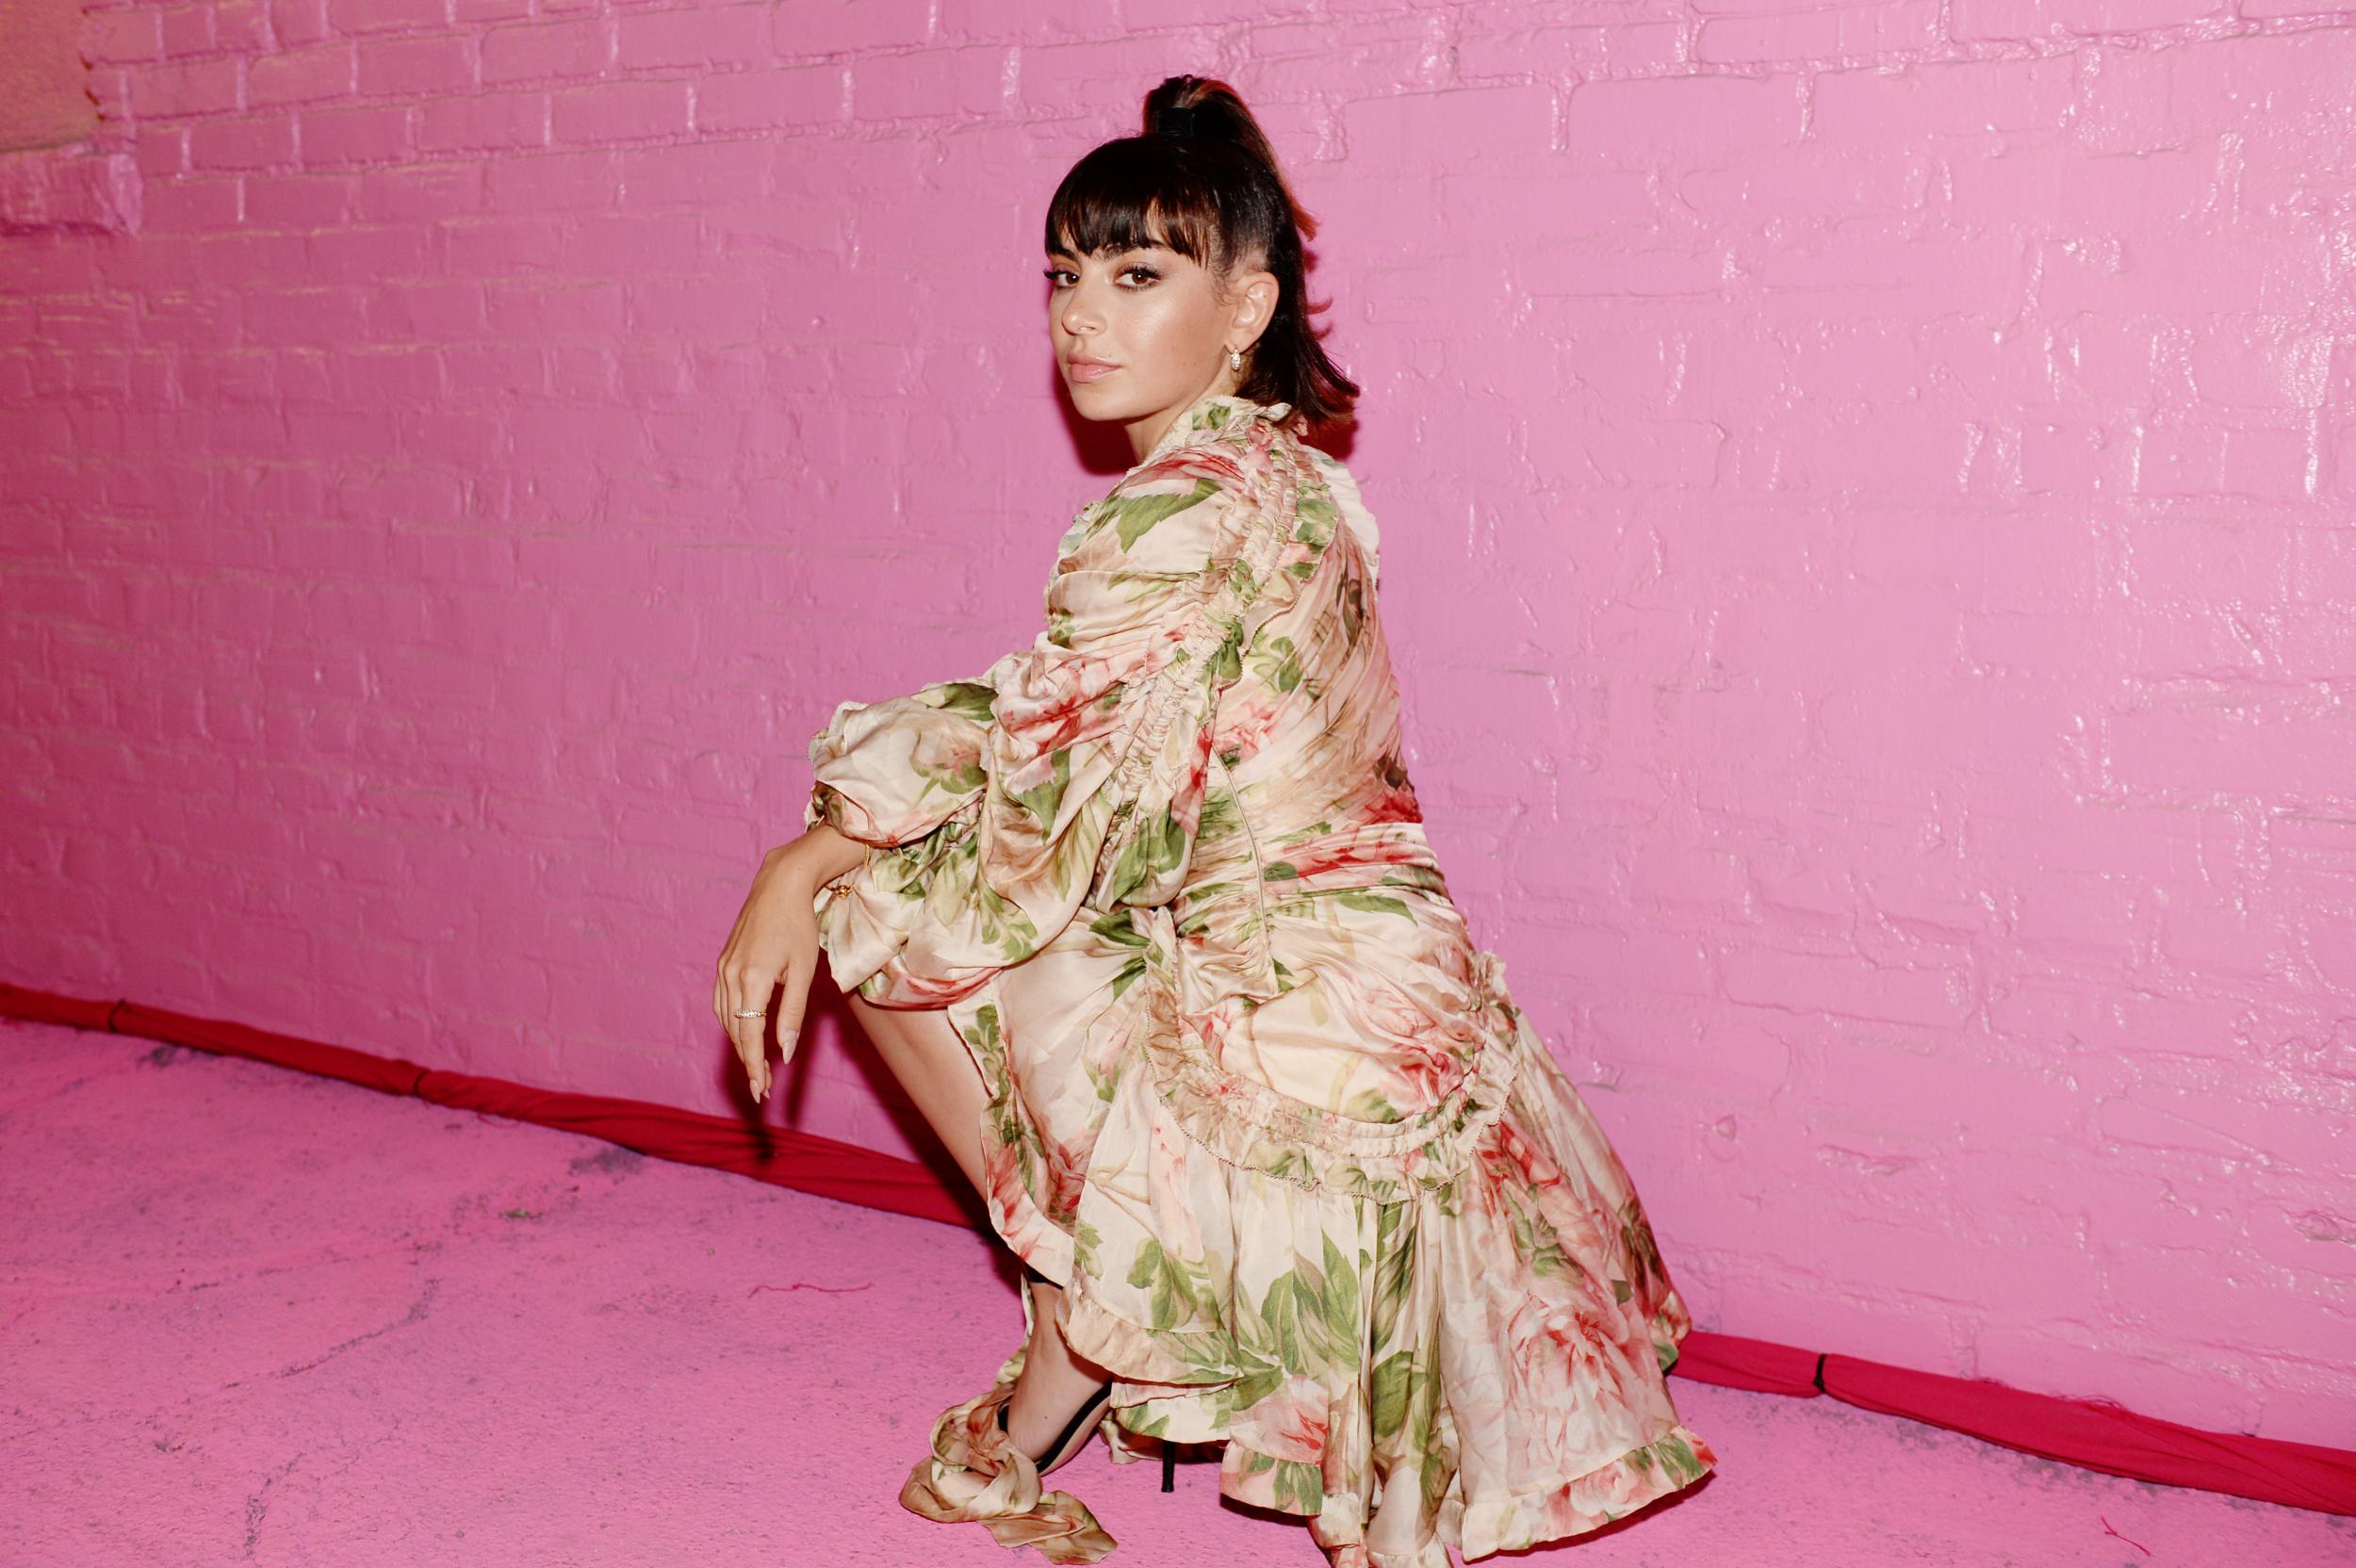 Over the past 10 years, Charli XCX has developed a ‘one for me, one of them’ attitude to popstardom